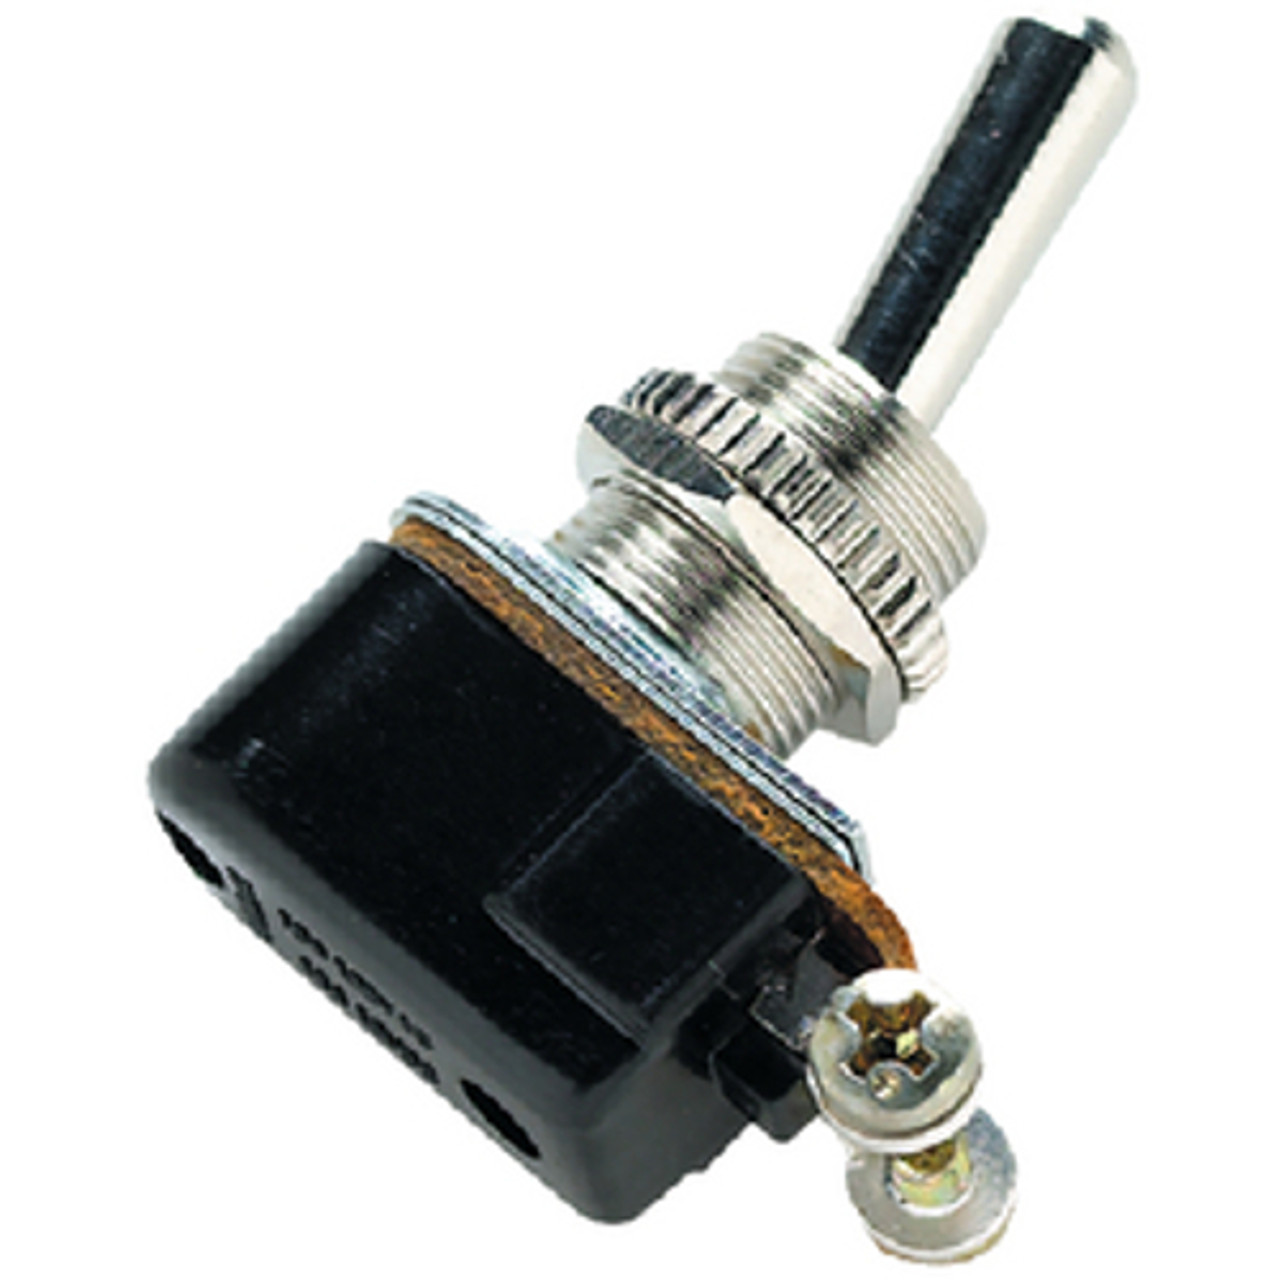 Chrome SPST 2 Position On / Off Toggle Switch for Boats